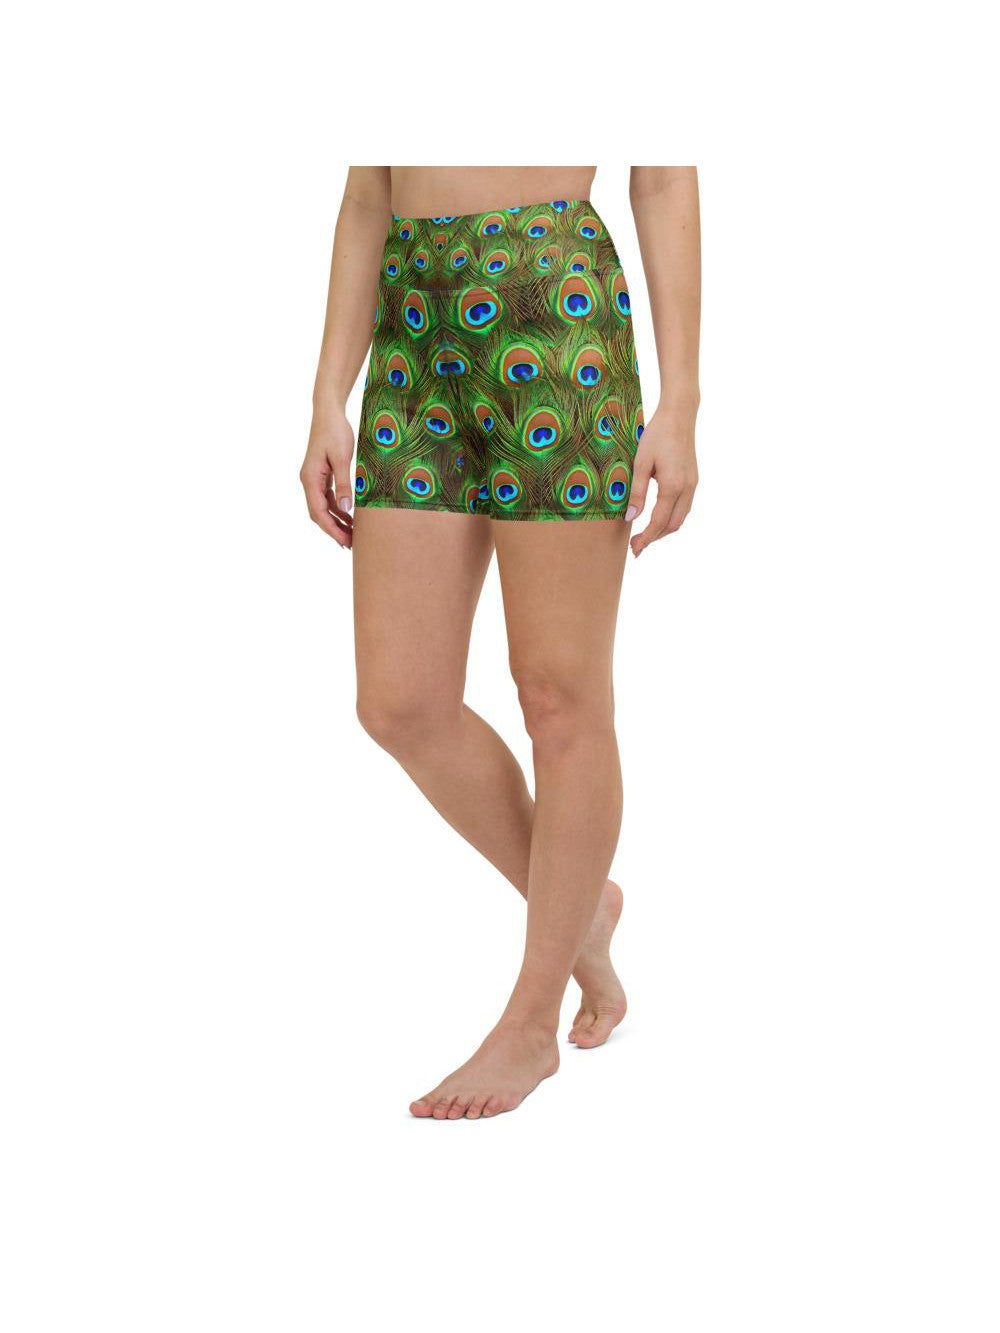 Peacock Feathered Yoga Shorts Gearbunch